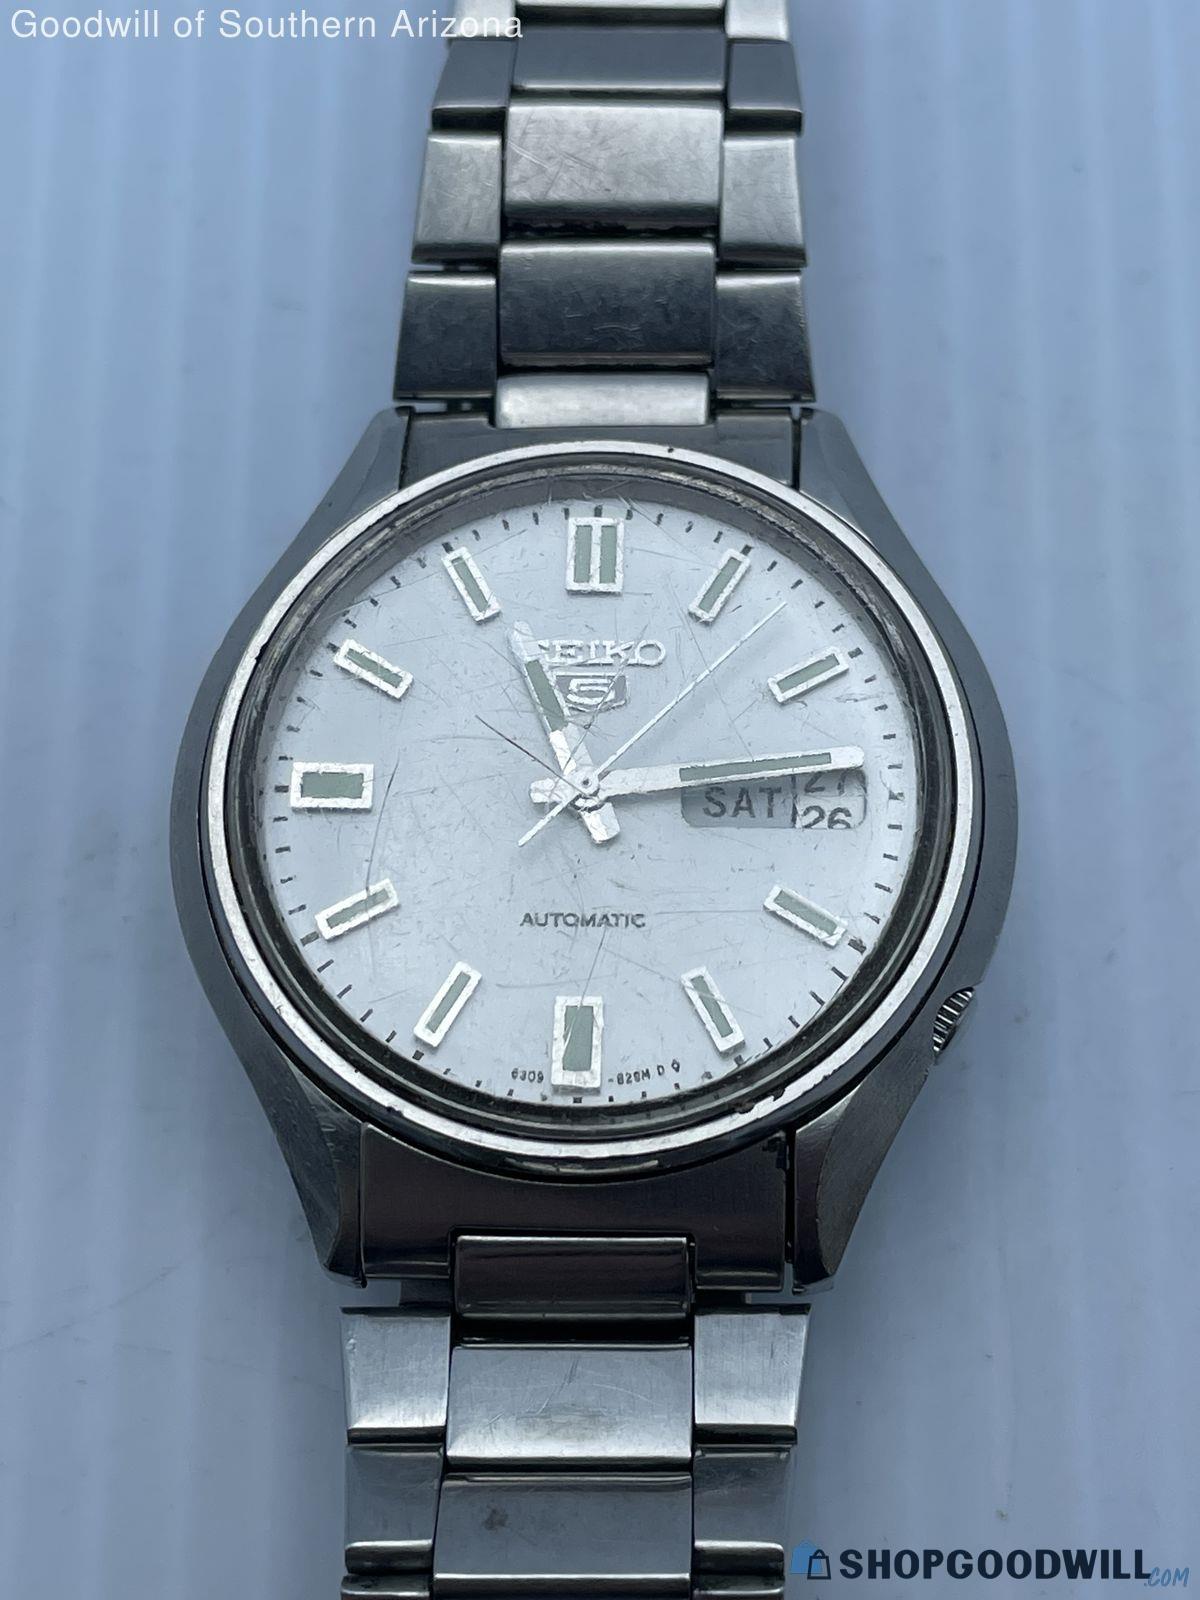 Seiko Automatic Watch-6309-8230- FOR REPAIRS - shopgoodwill.com